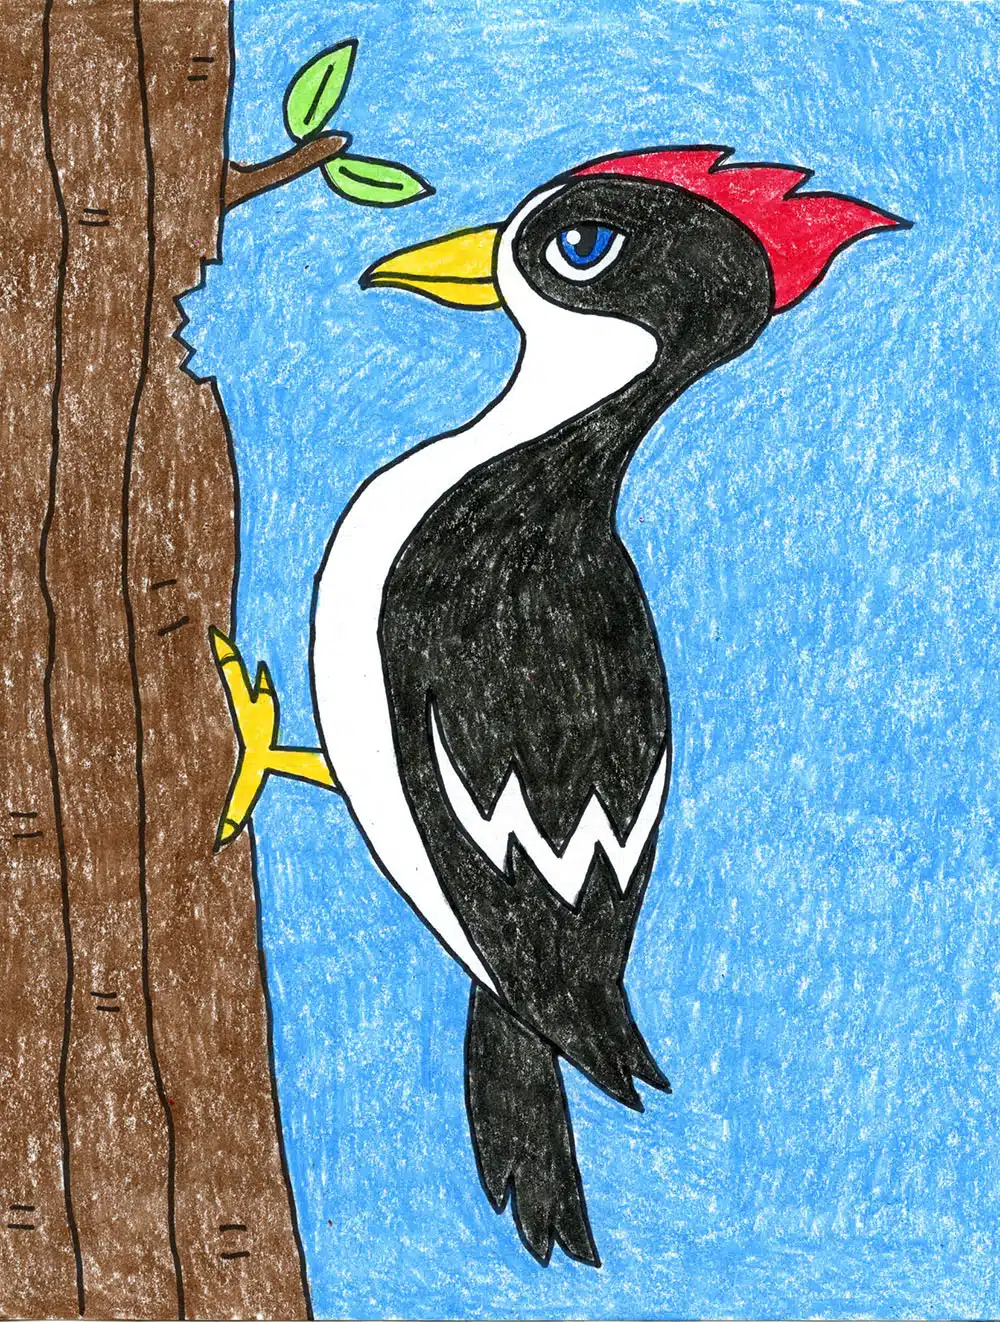 Easy Draw a Woodpecker Tutorial and Woodpecker Coloring Page